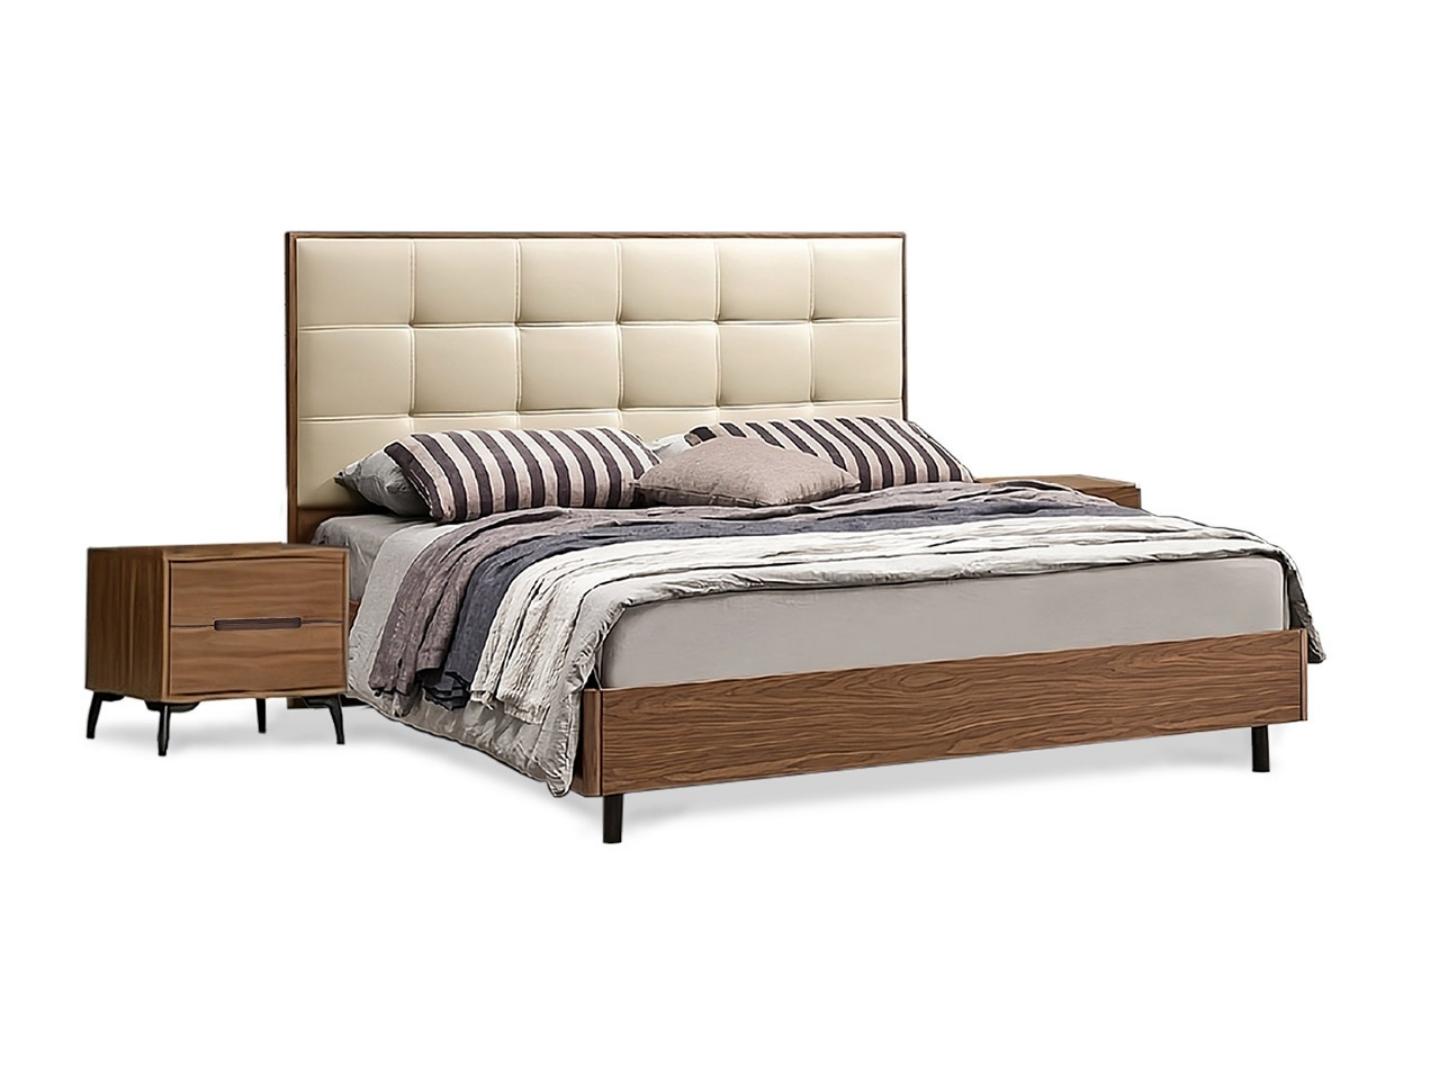 SOLID WOOD BEDFRAME, WITH IVORY HEADBOARD UPHOLSTERY - Lux Furniture